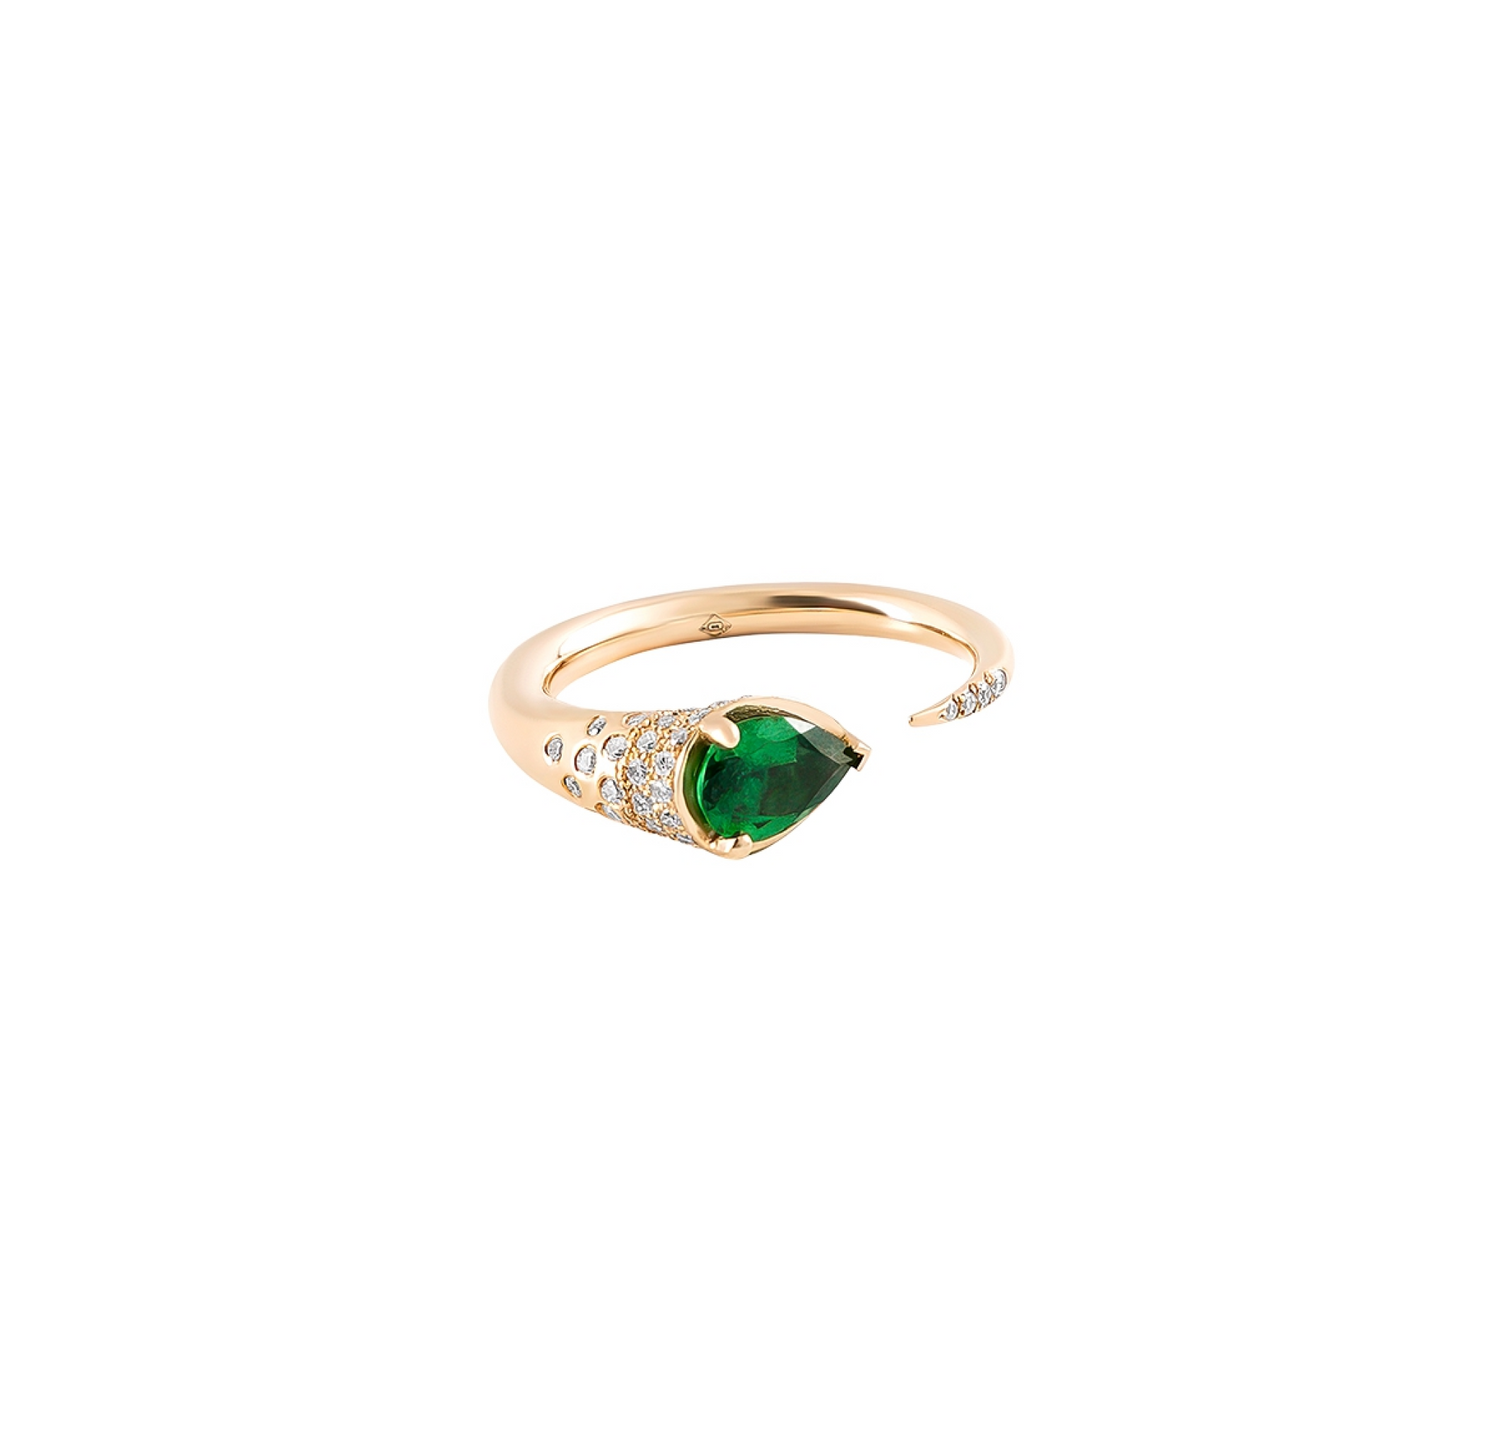 Sornette ring with dots, tsavorite, and yellow gold